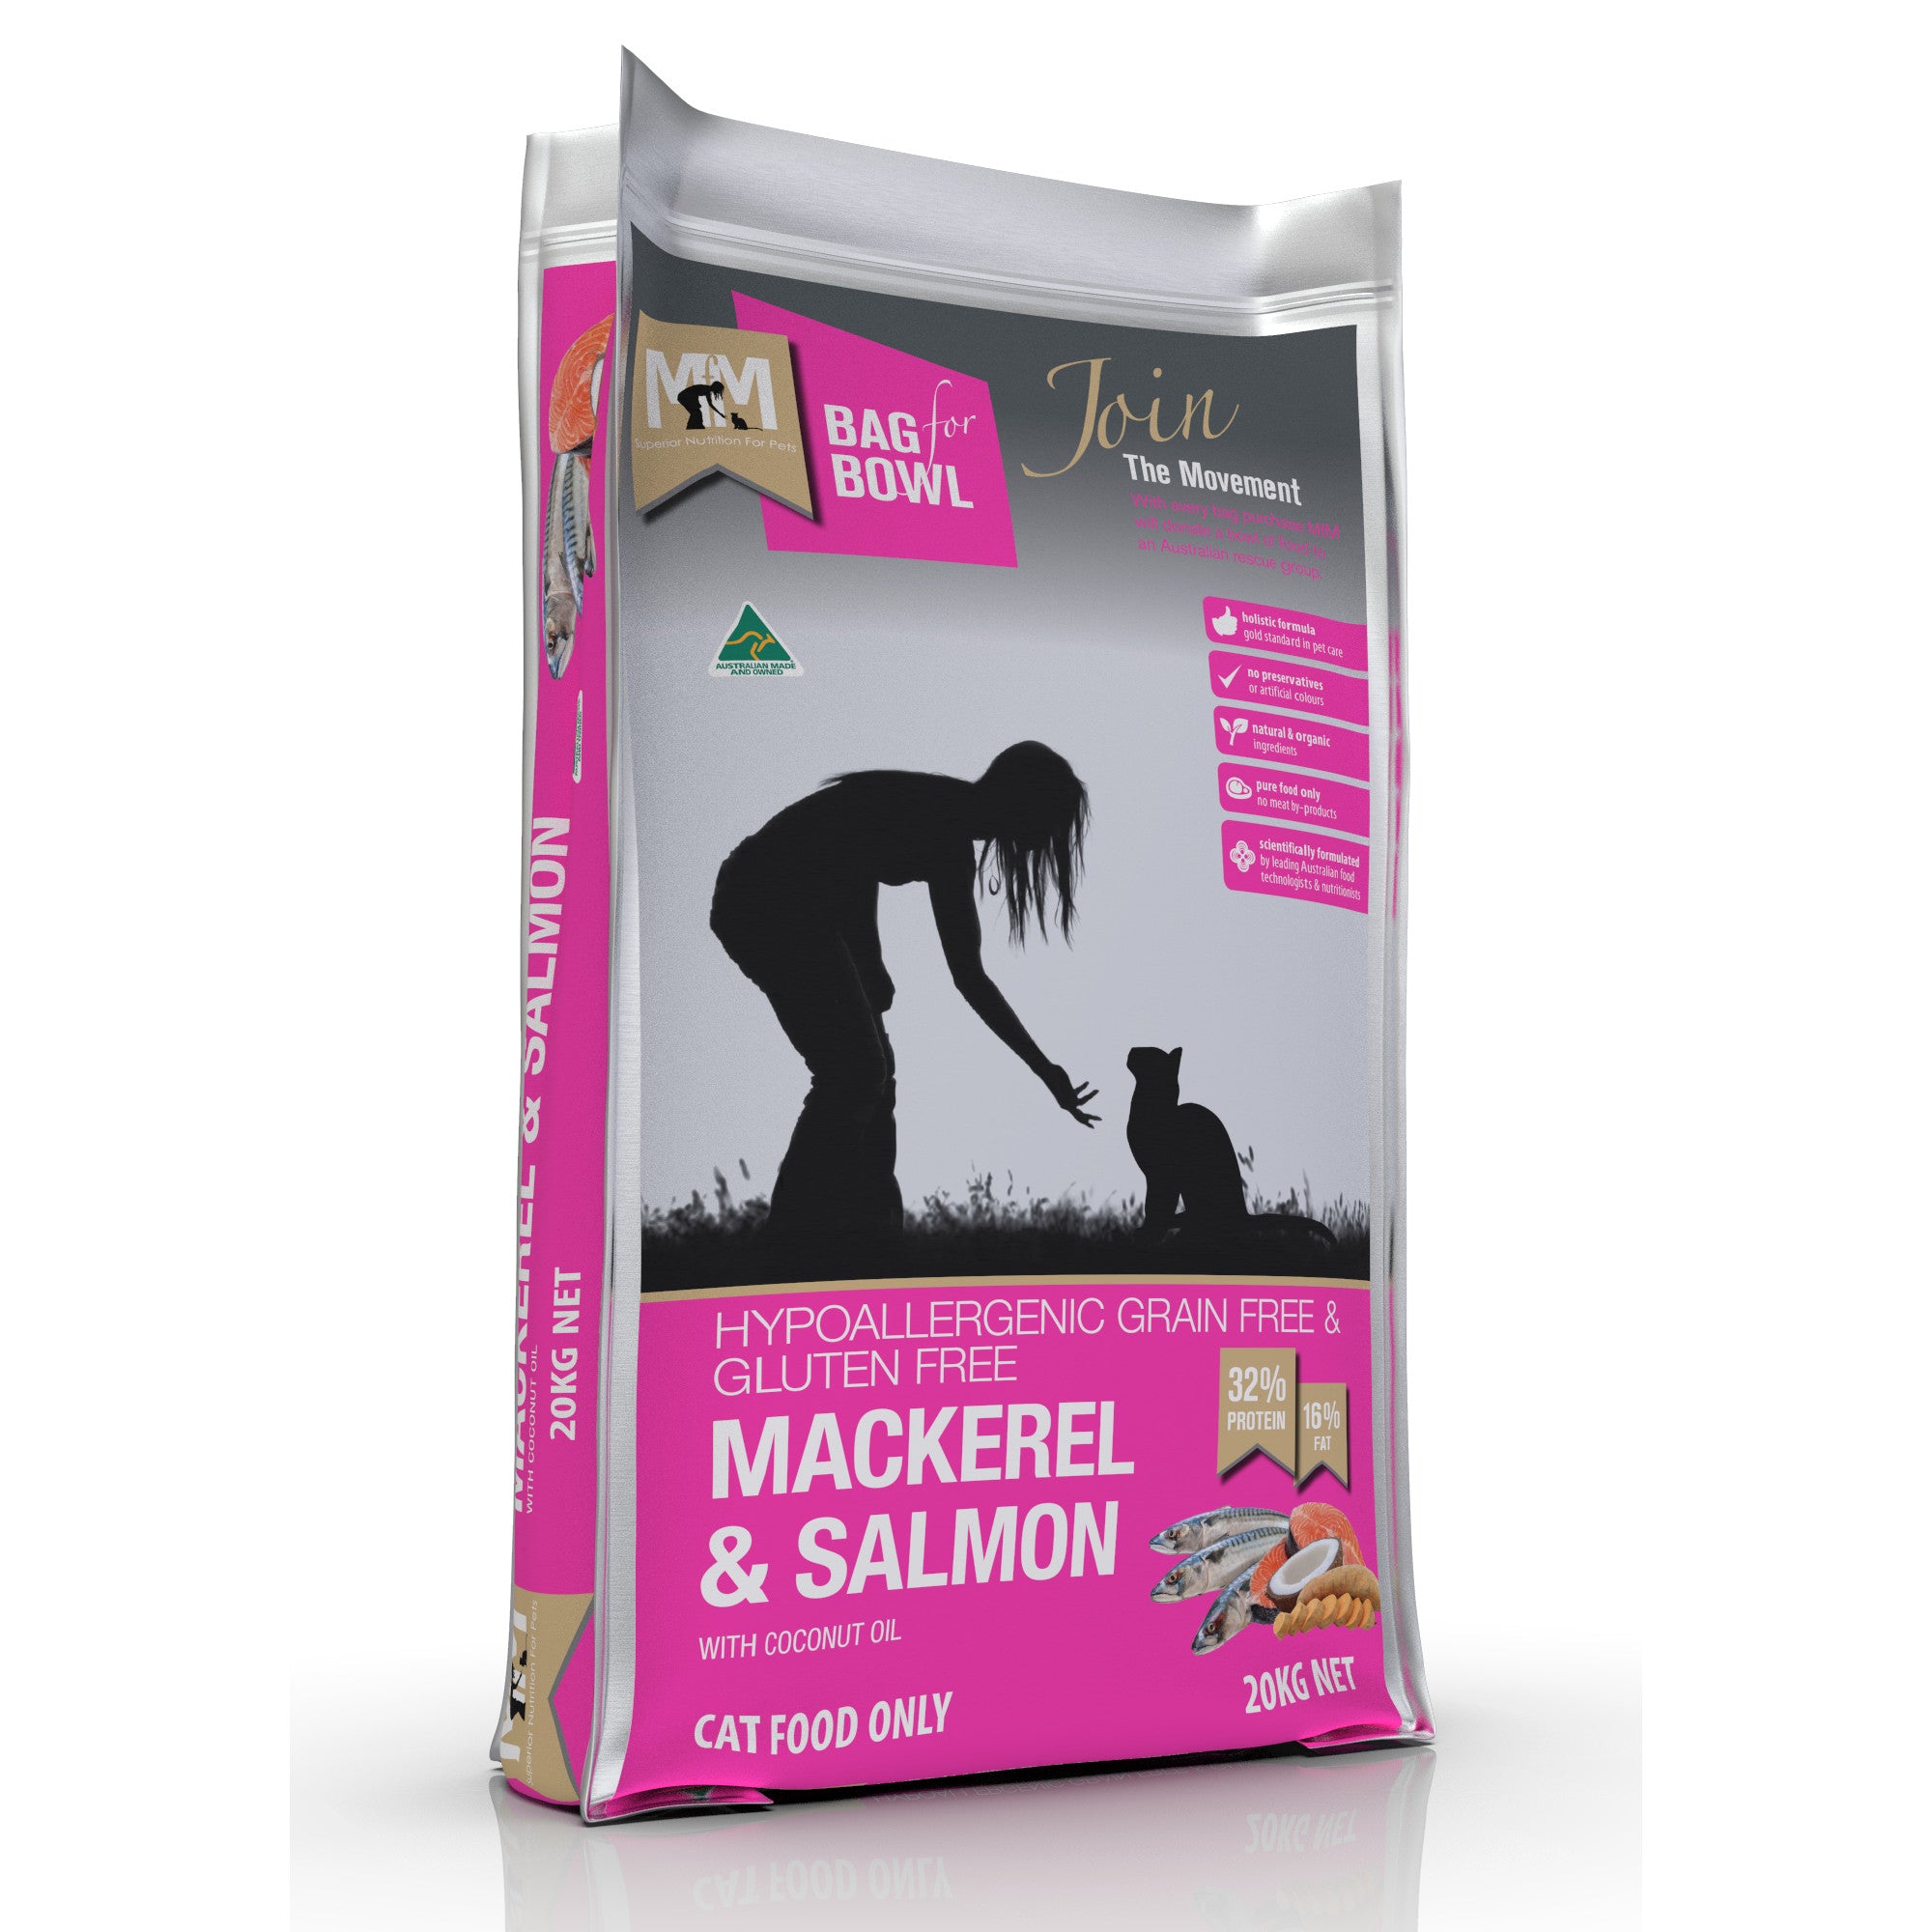 Meals for Meows Mackerel & Salmon Dry Cat Food 20kg.